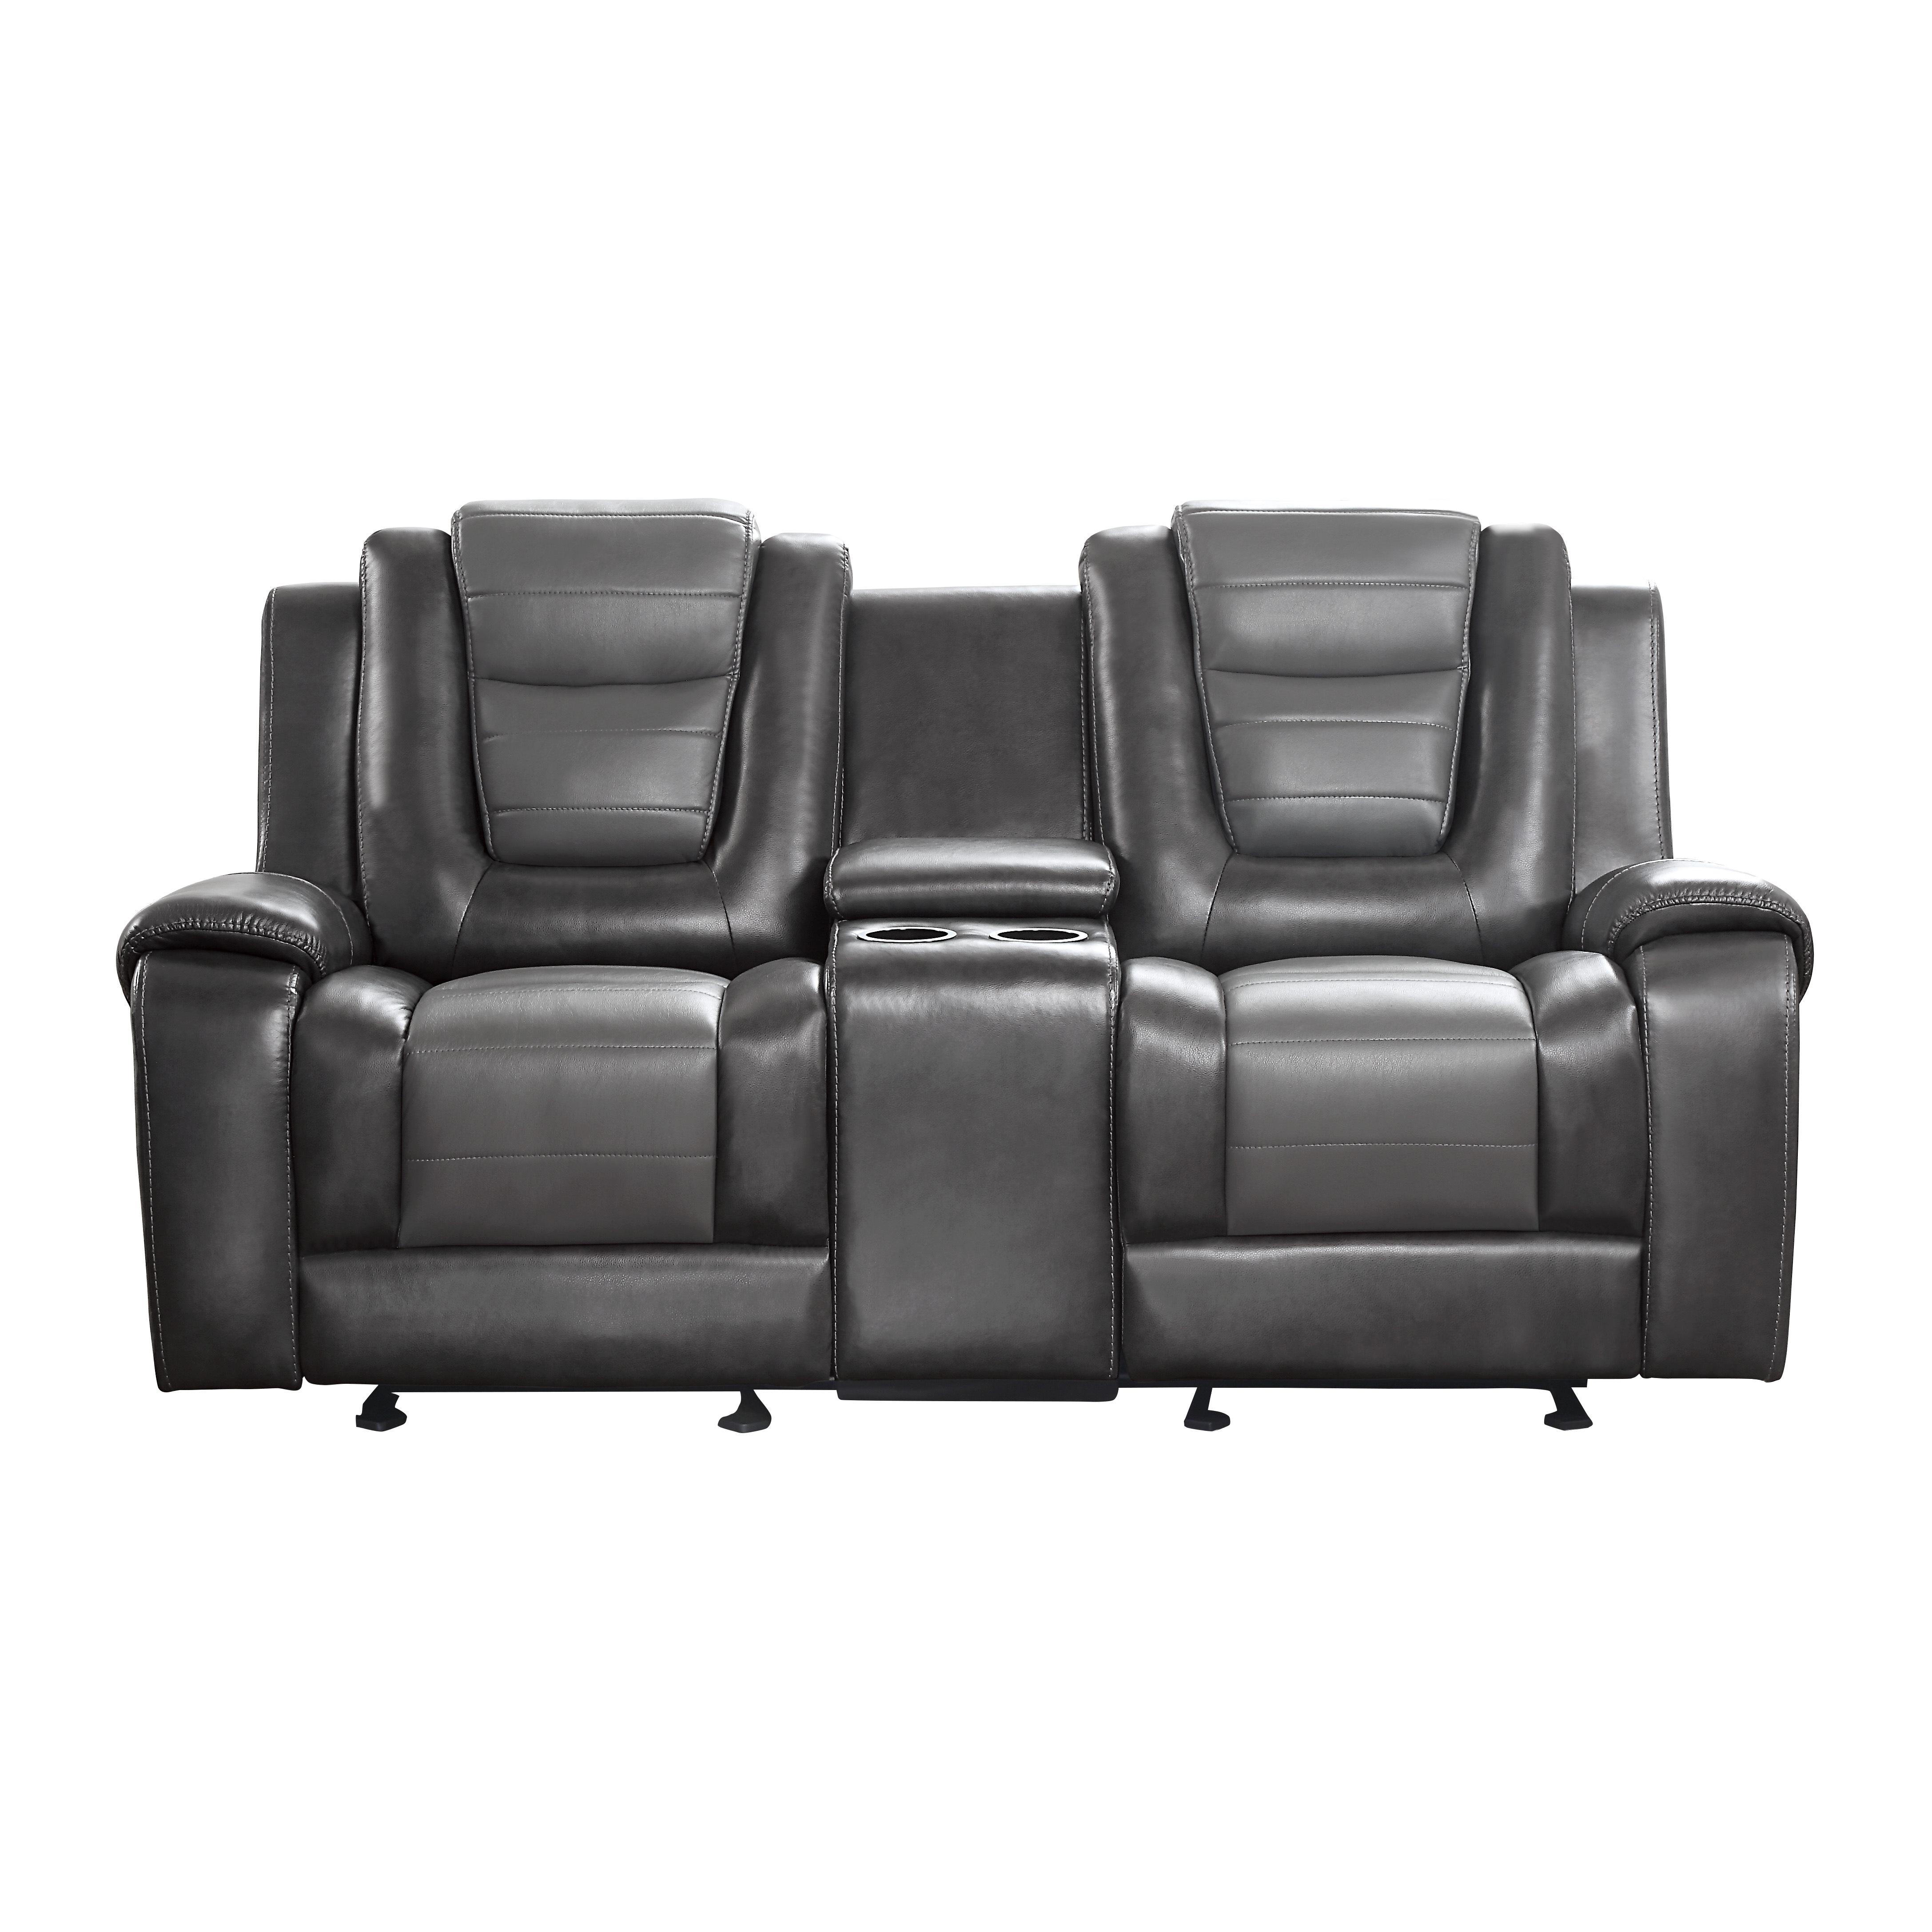 Transitional Reclining Loveseat 9470GY-2 Briscoe 9470GY-2 in Light Gray, Dark Gray Faux Leather